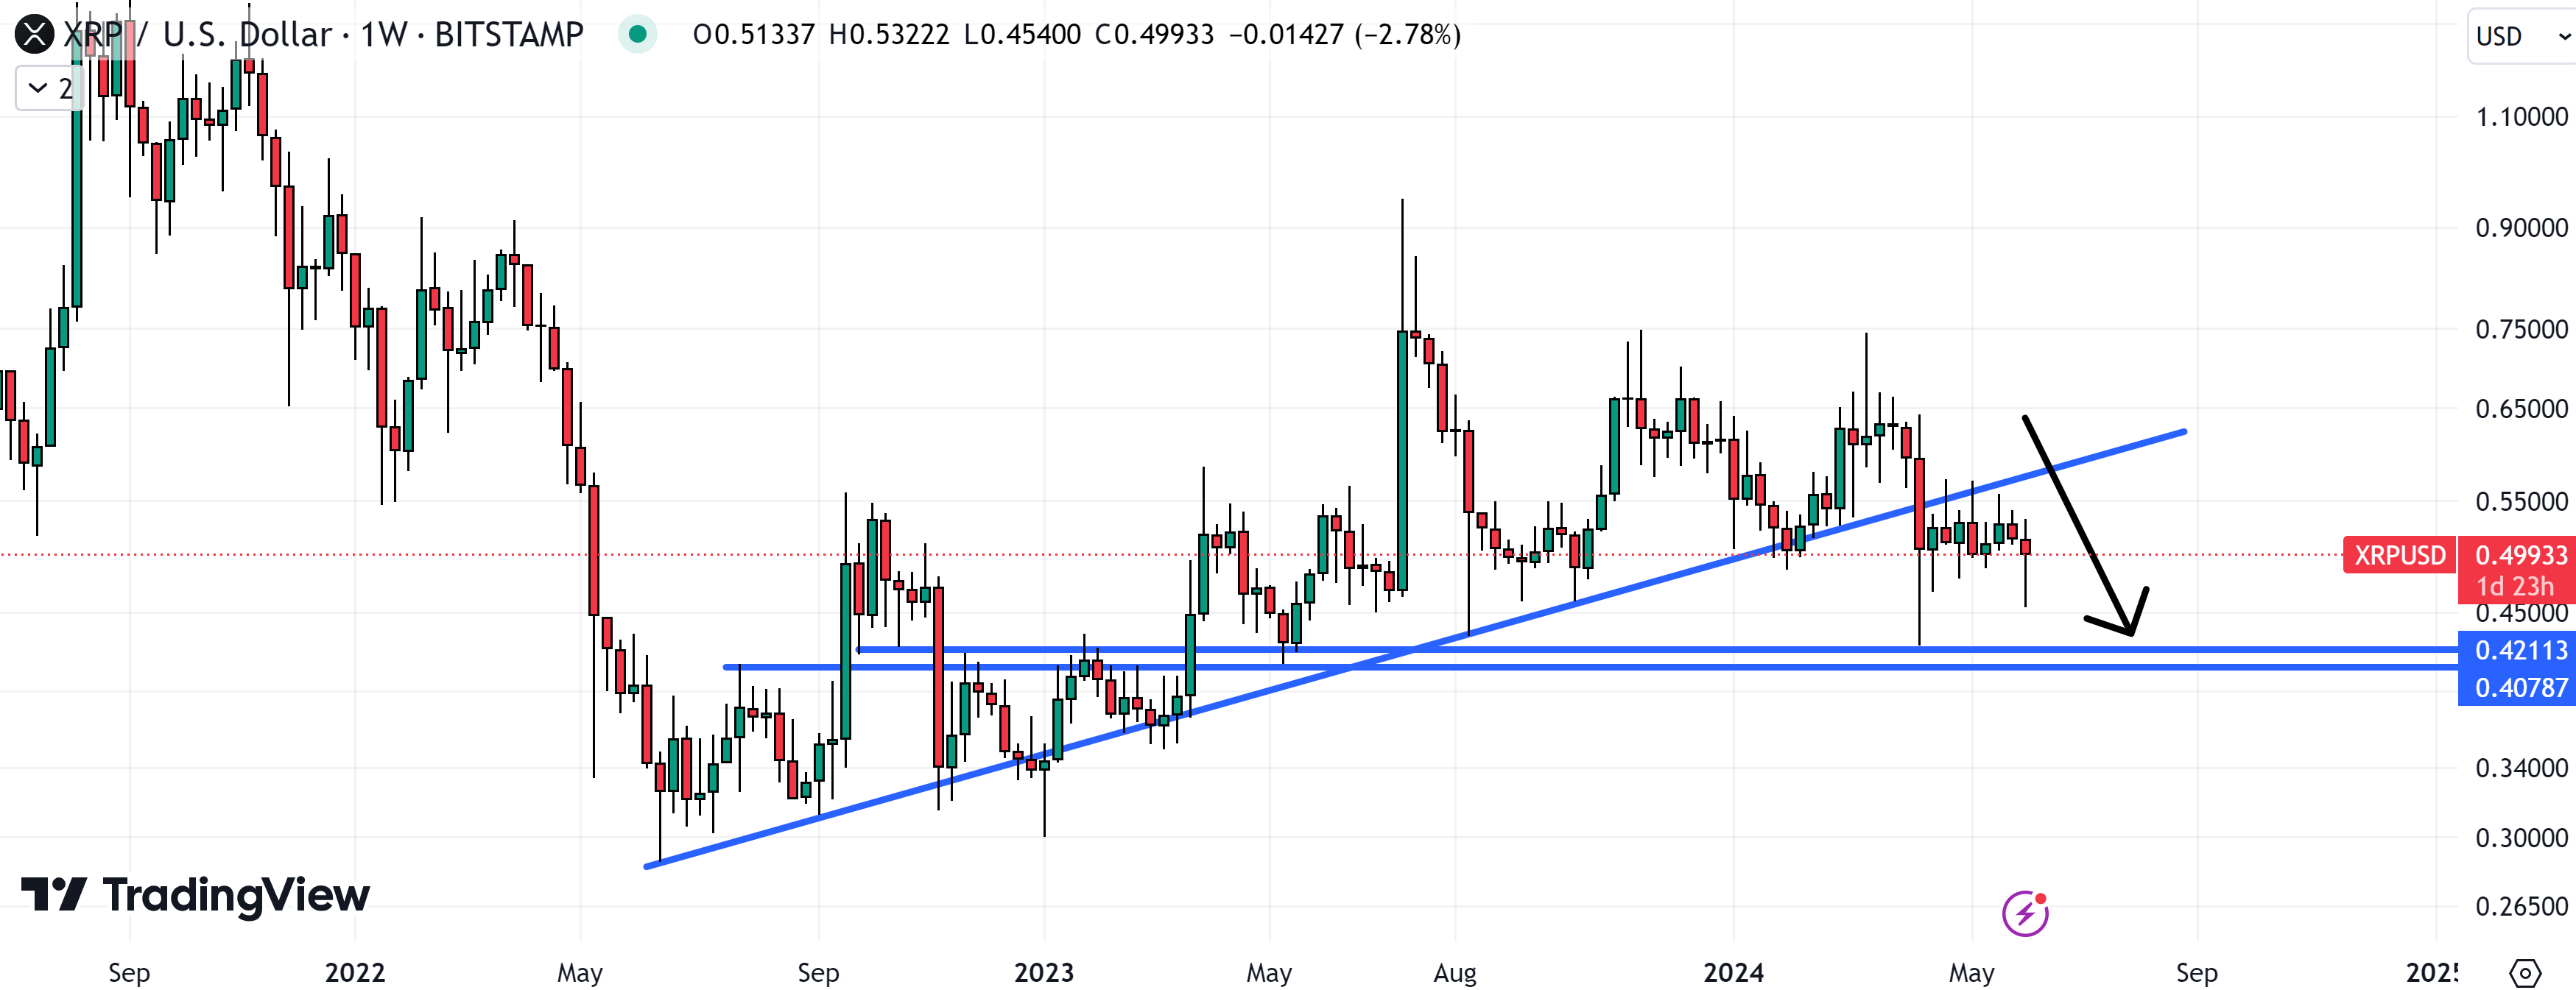 XRP price chart analysis suggests a retest of support-turned-resistance around $0.40 in the coming weeks is on the cards.